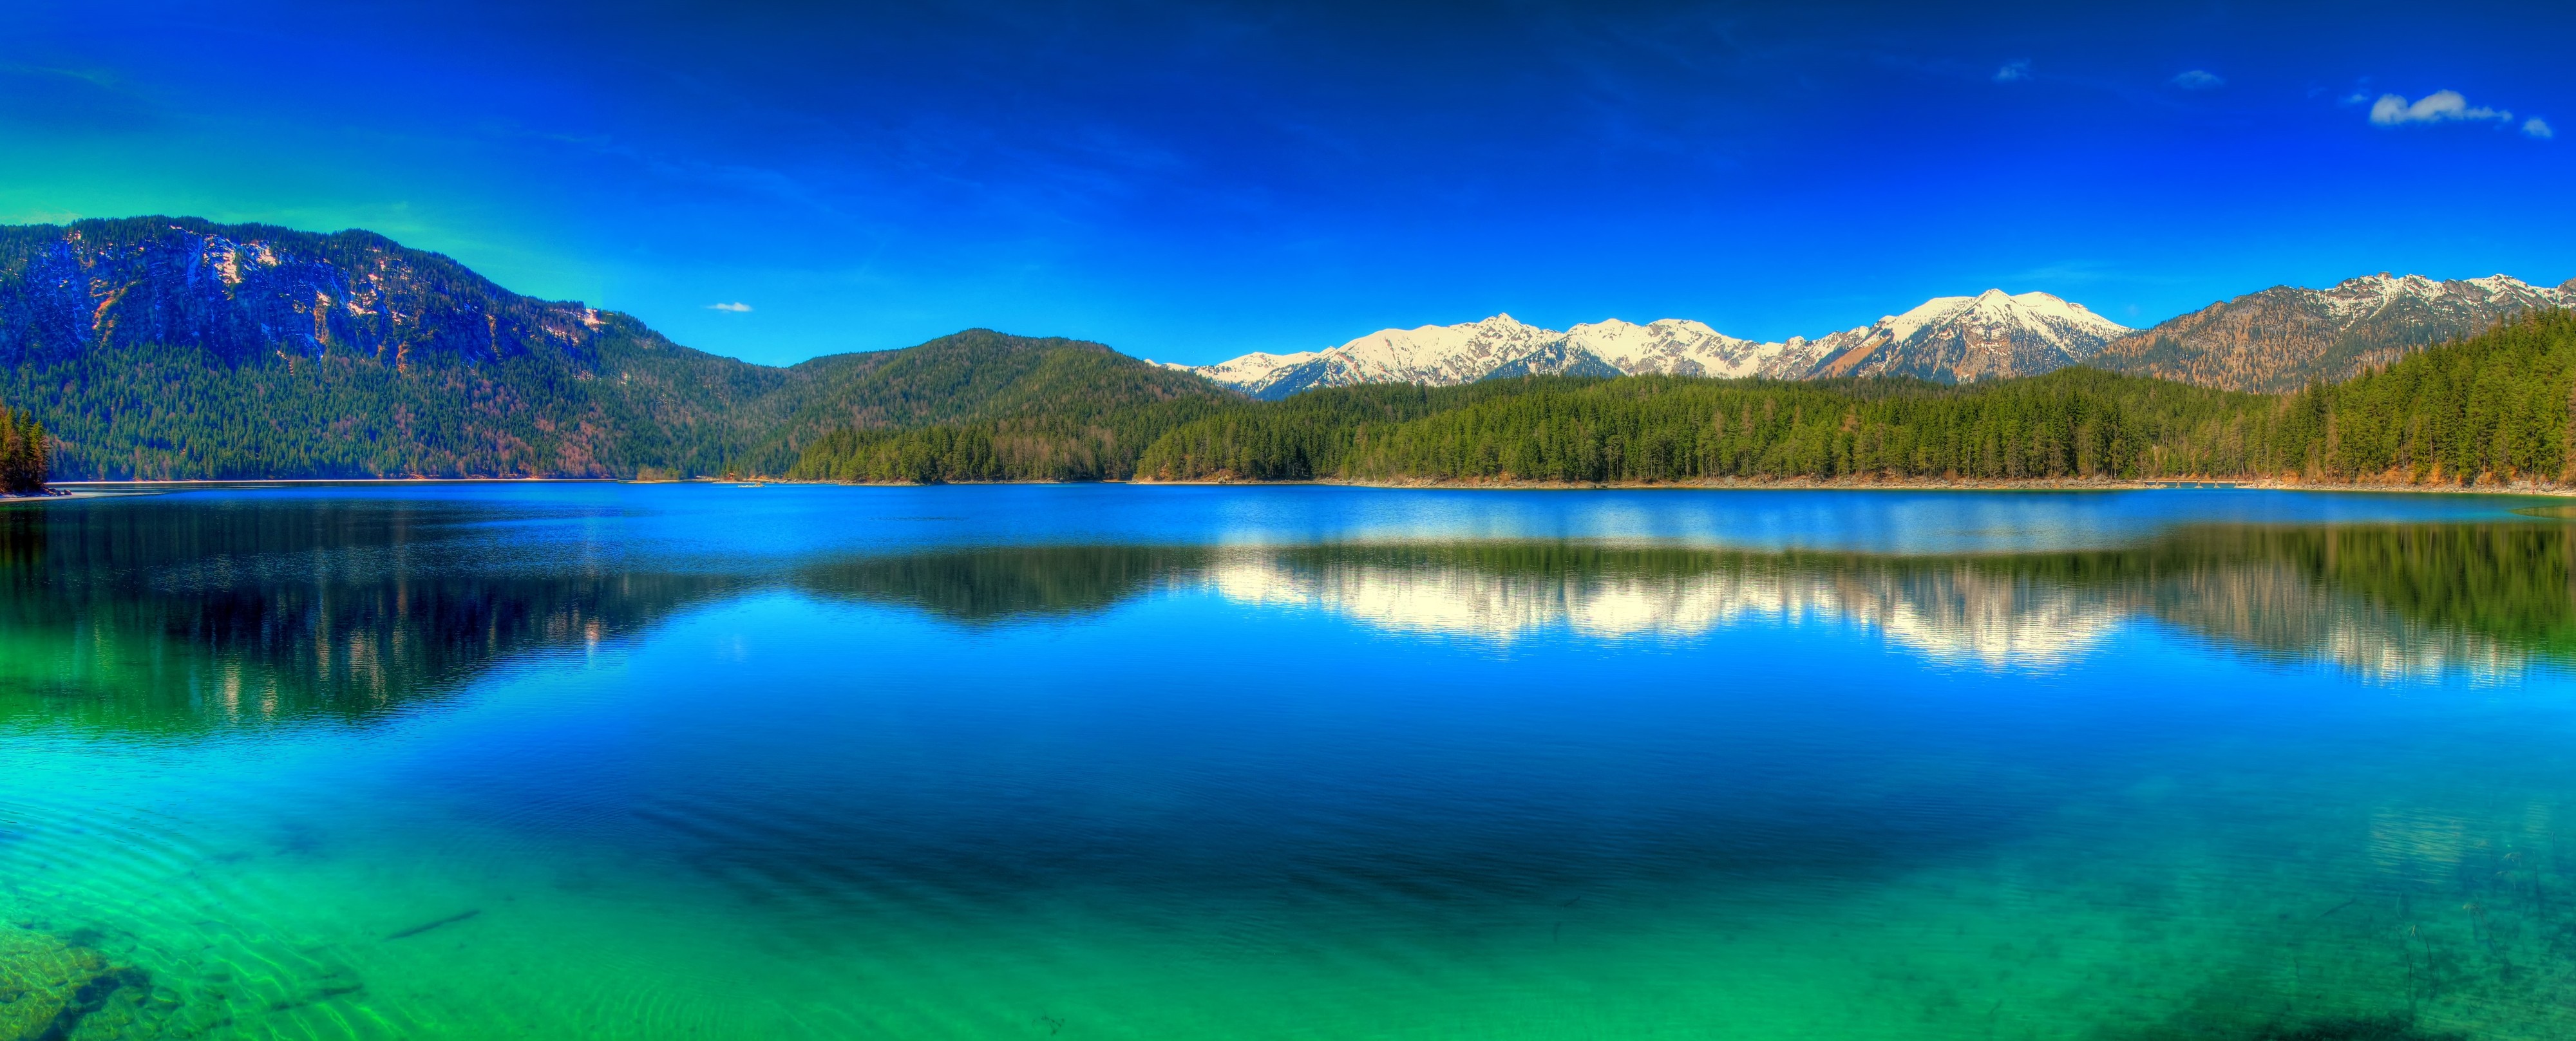 Nature Landscape Panoramas Lake Mountains Forest Germany Blue Sky Green Water Reflection Snowy Peak 4000x1617